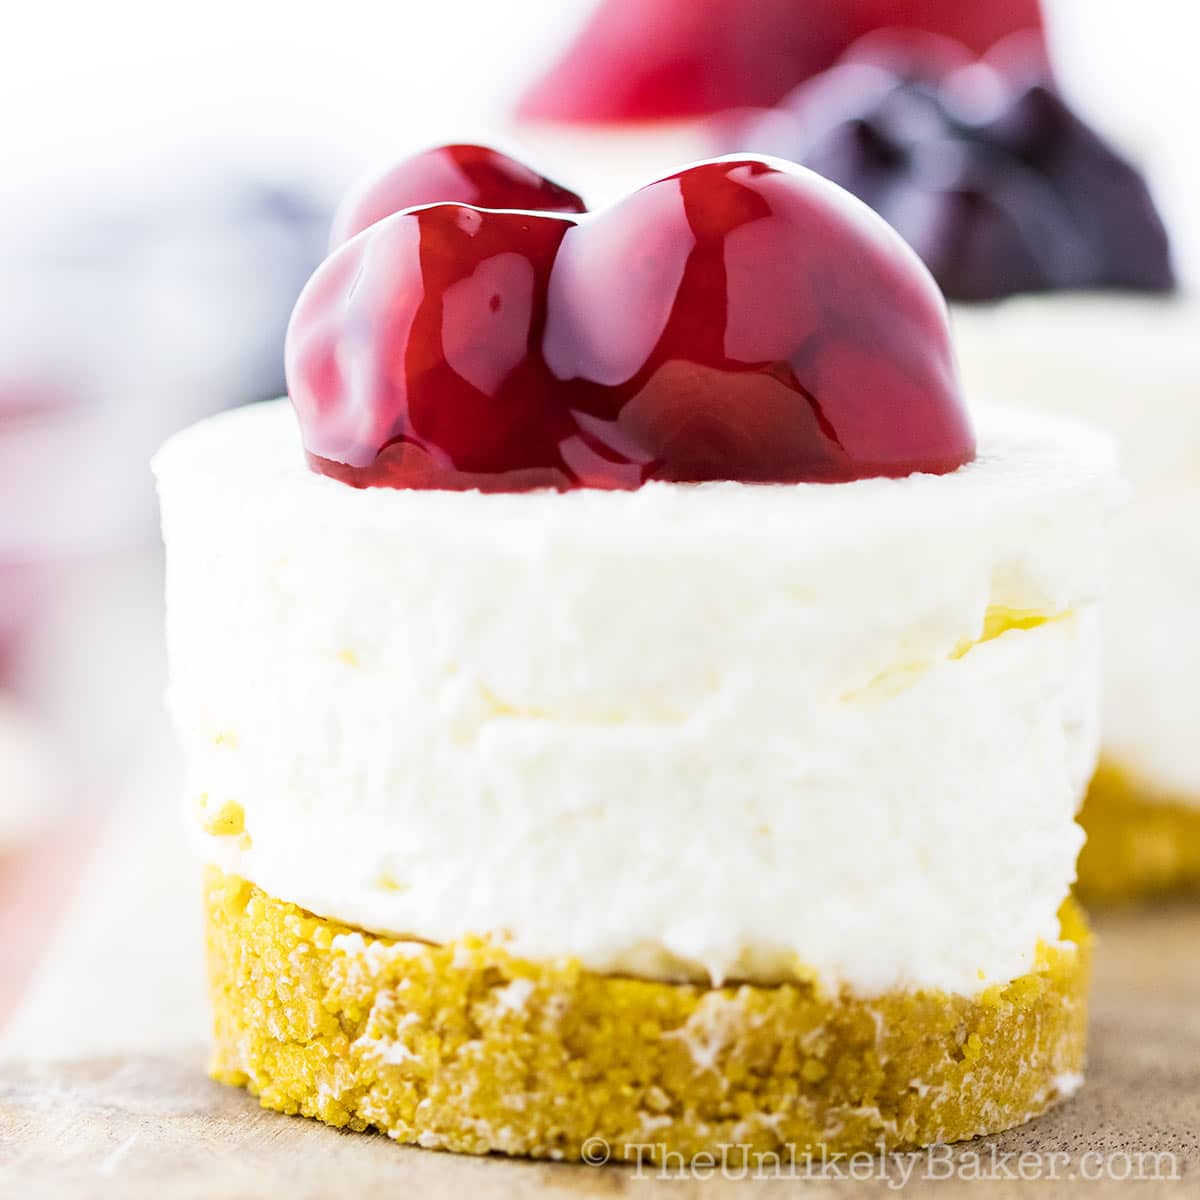 The Best No Bake Unlikely Baker® Cheesecakes The Mini 